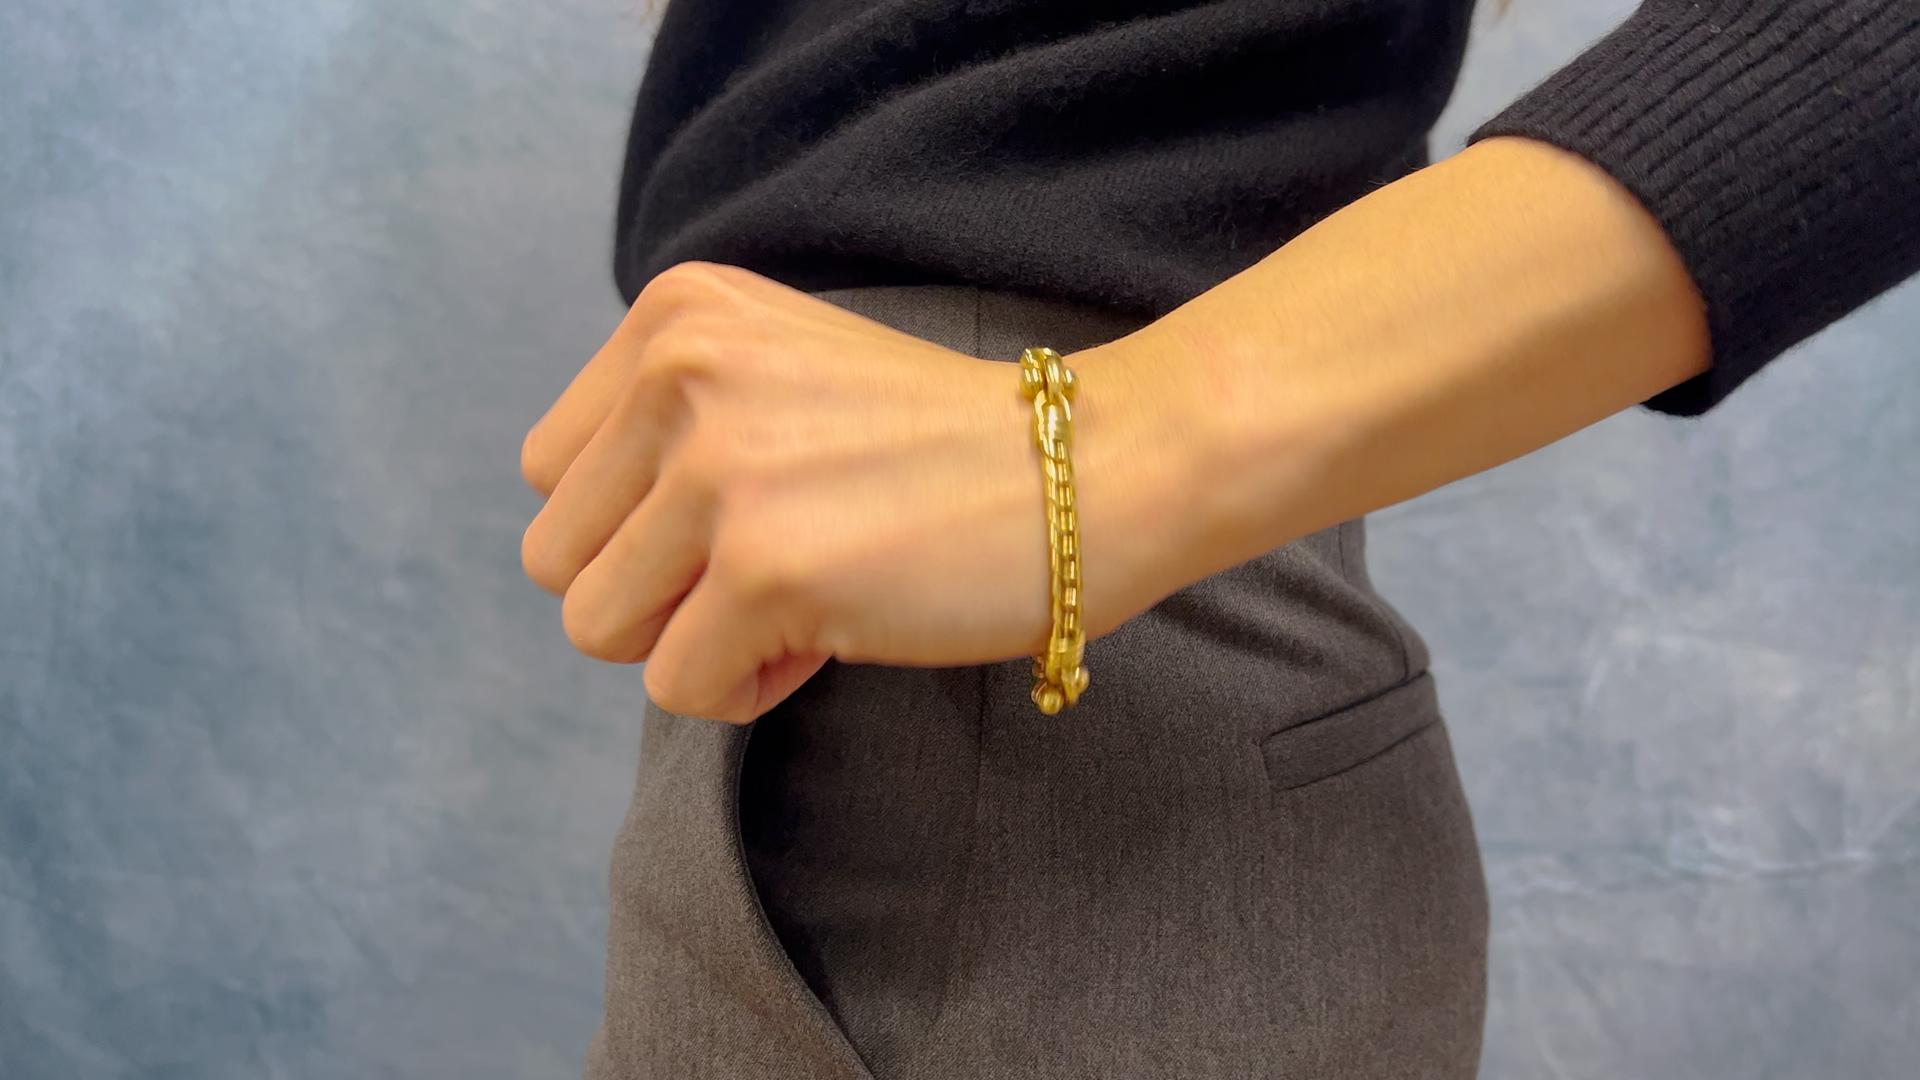 One Vintage Bvlgari Italy 18k Yellow Gold Chain Link Bracelet. Crafted in 18 karat yellow gold signed Bvlgari, serial #A4608 with Italian hallmarks, weighing 37.35 grams. Circa 1970. The bracelet is 7 ¾ inches in length.

About this Item: This